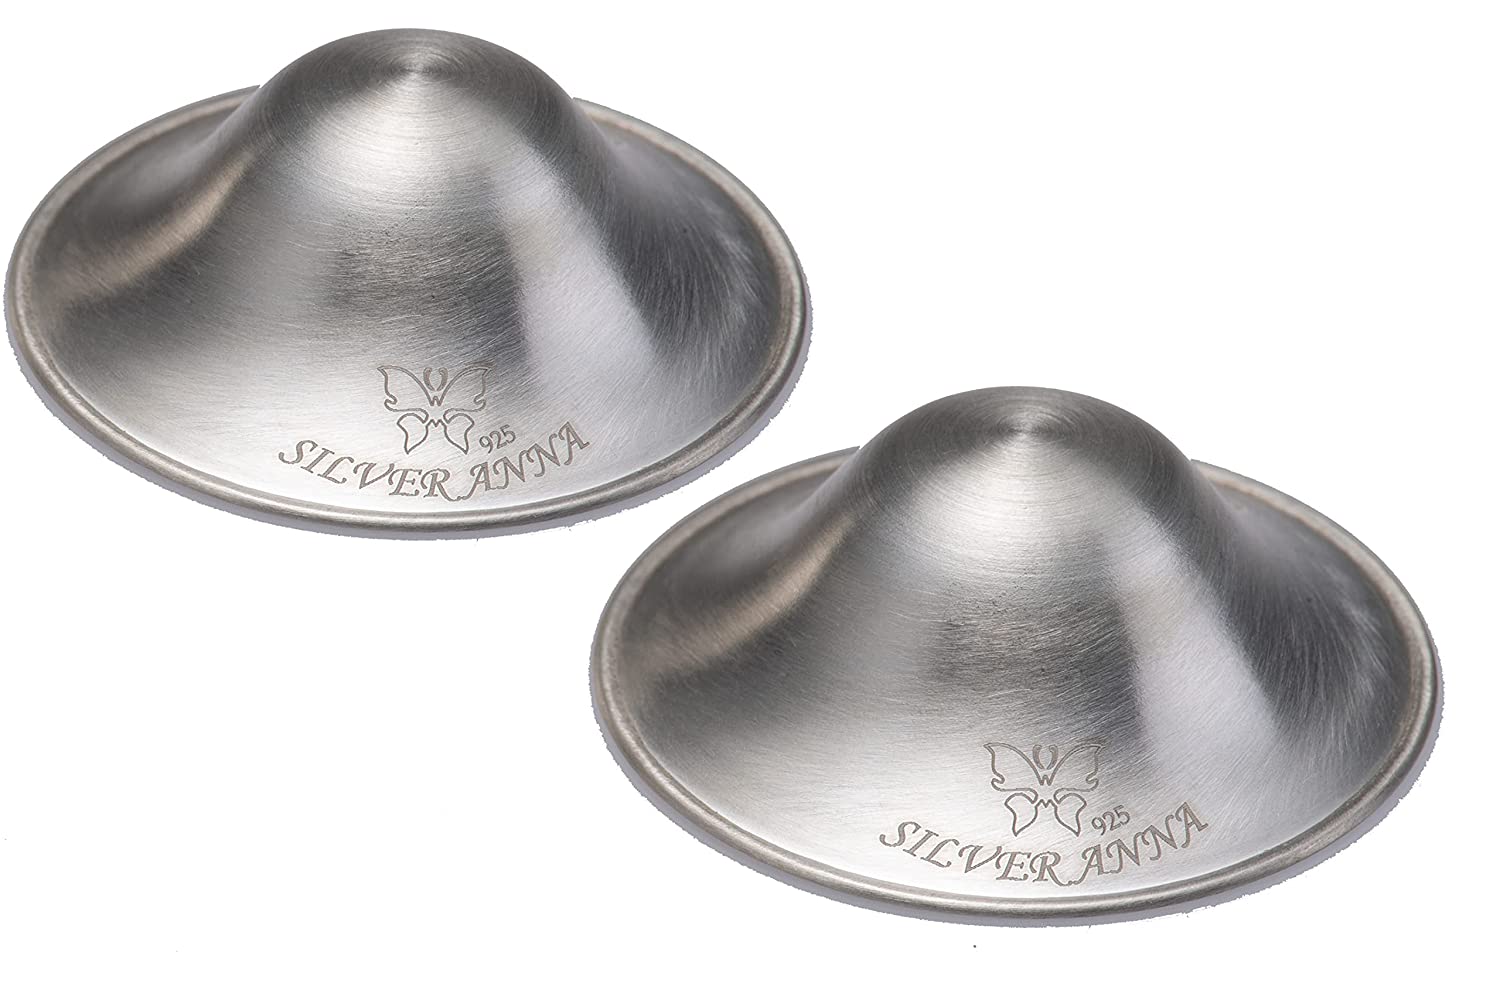  SILVERETTE The Original Silver Nursing Cups - Soothe and  Protect Your Nursing Nipples -Made in Italy (Regular + O-Feel) : Baby